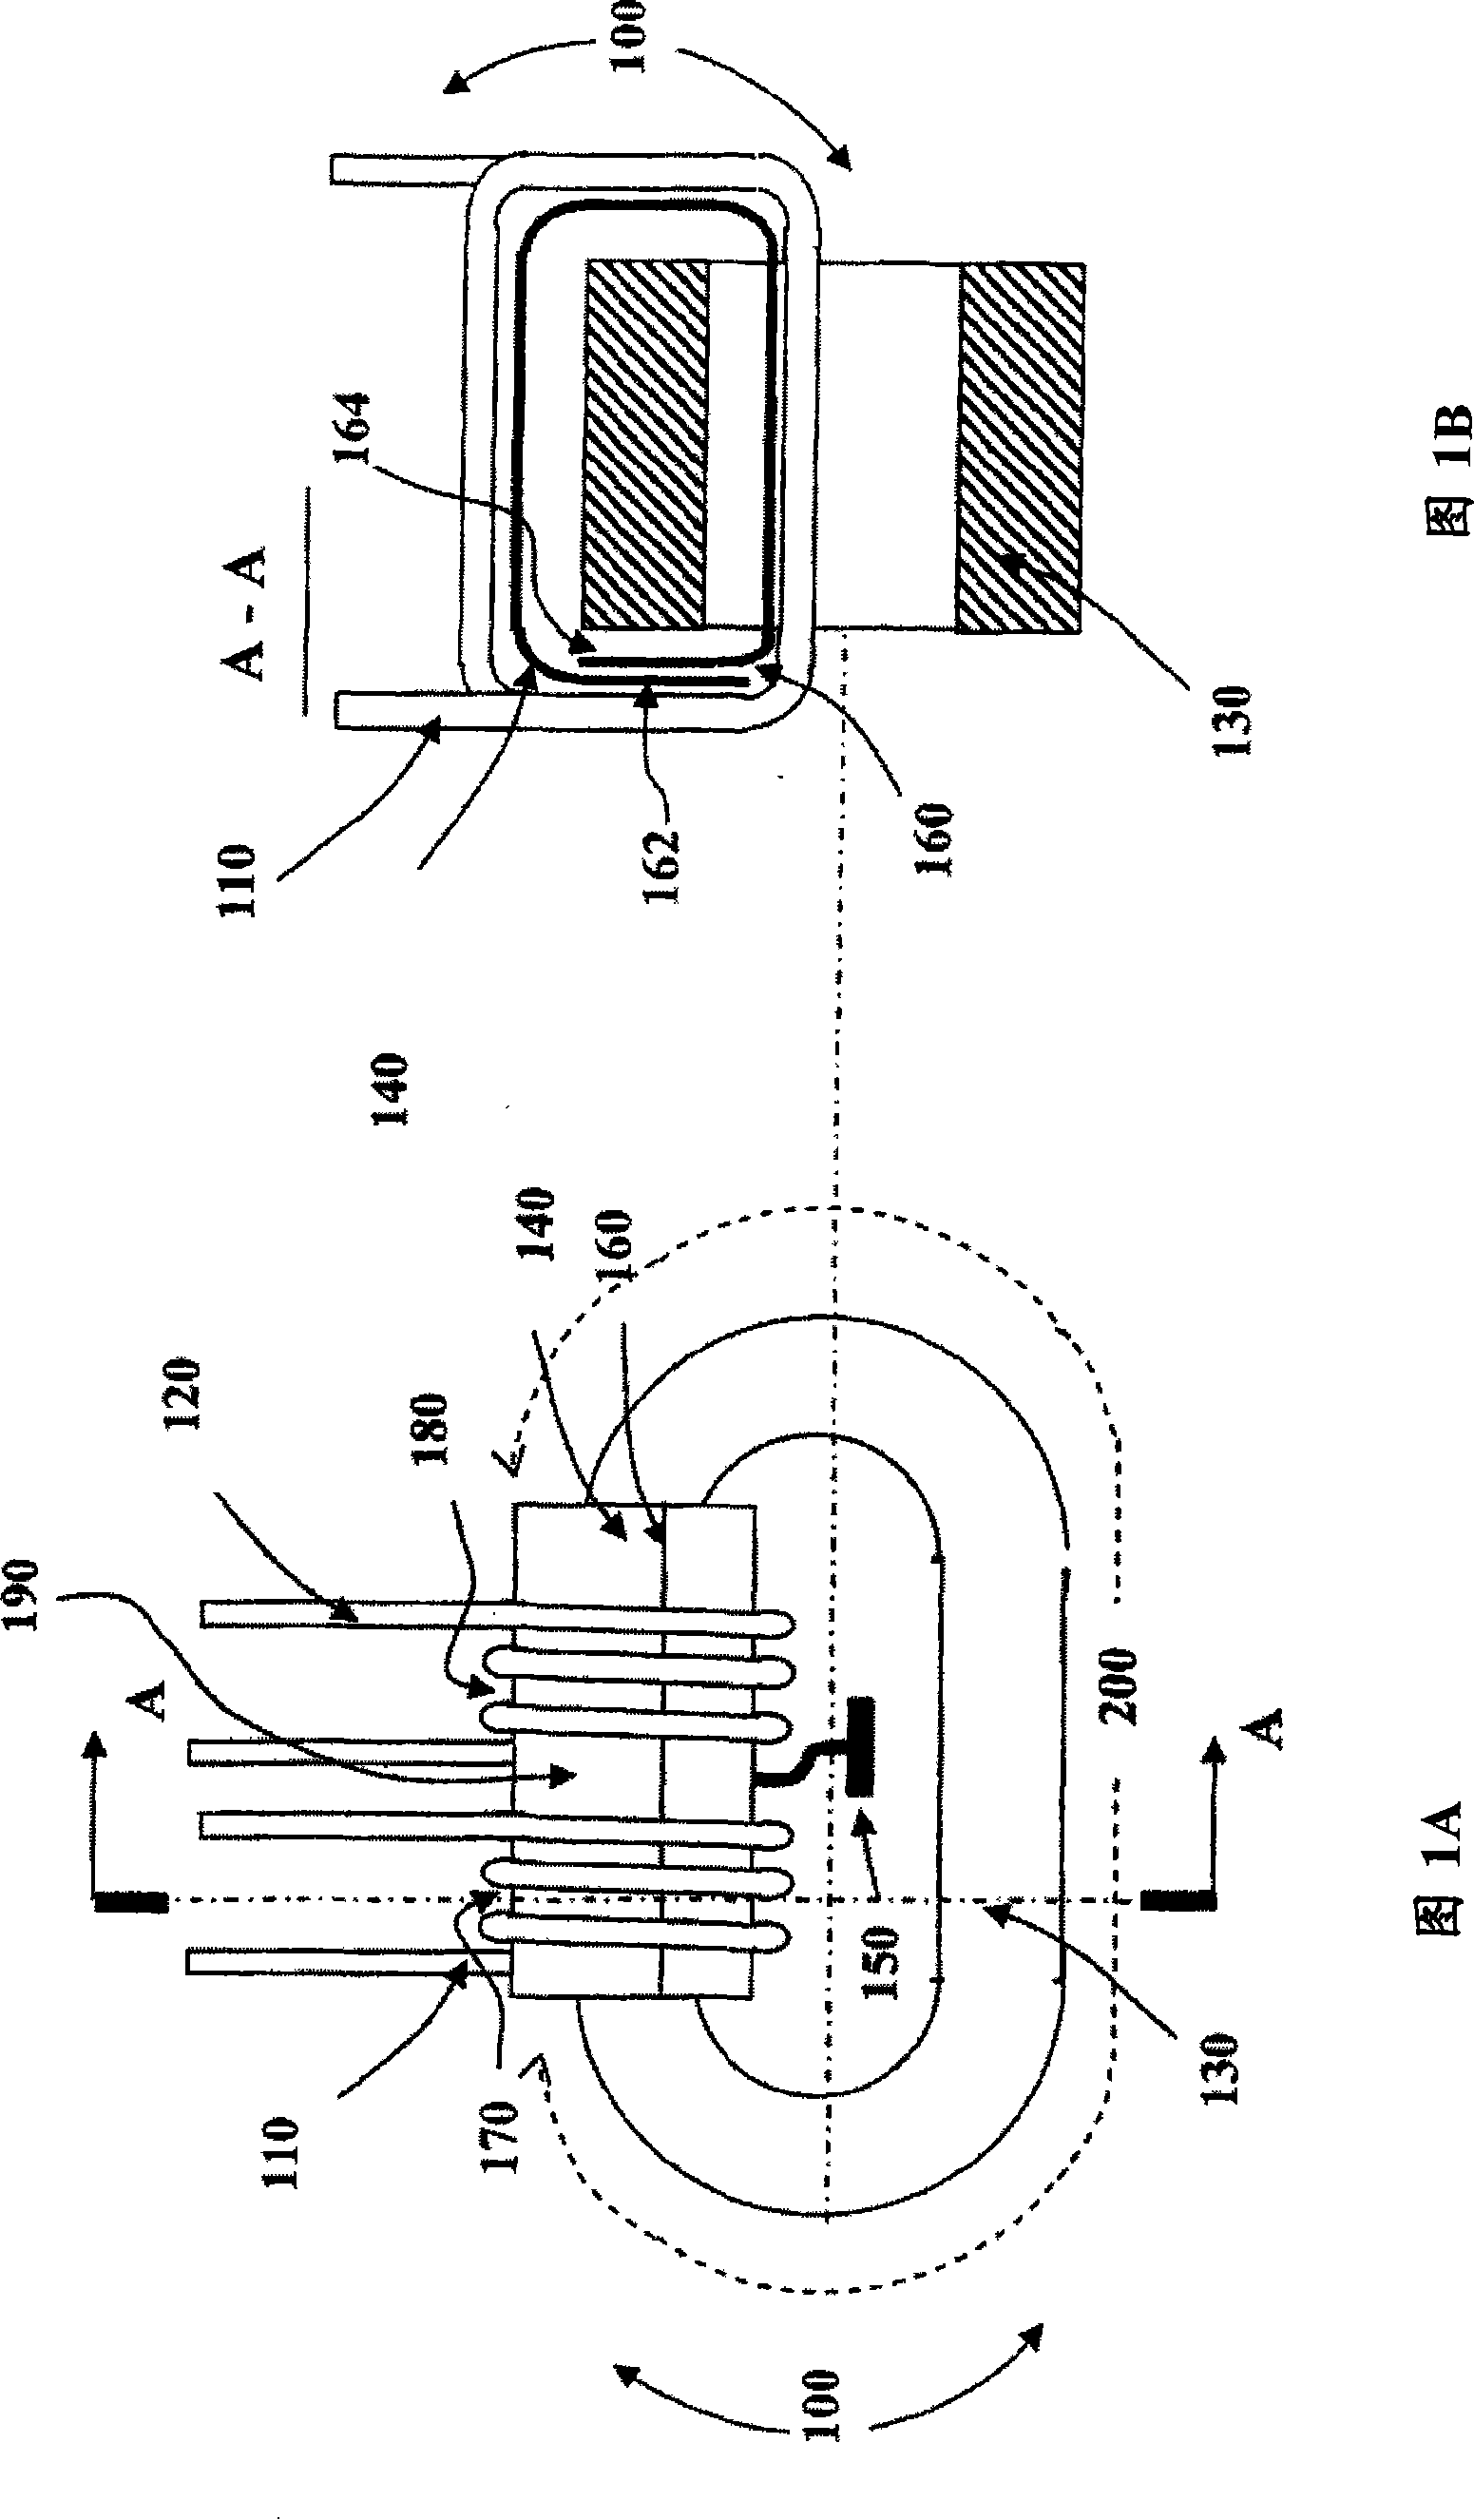 Magnetic induction device